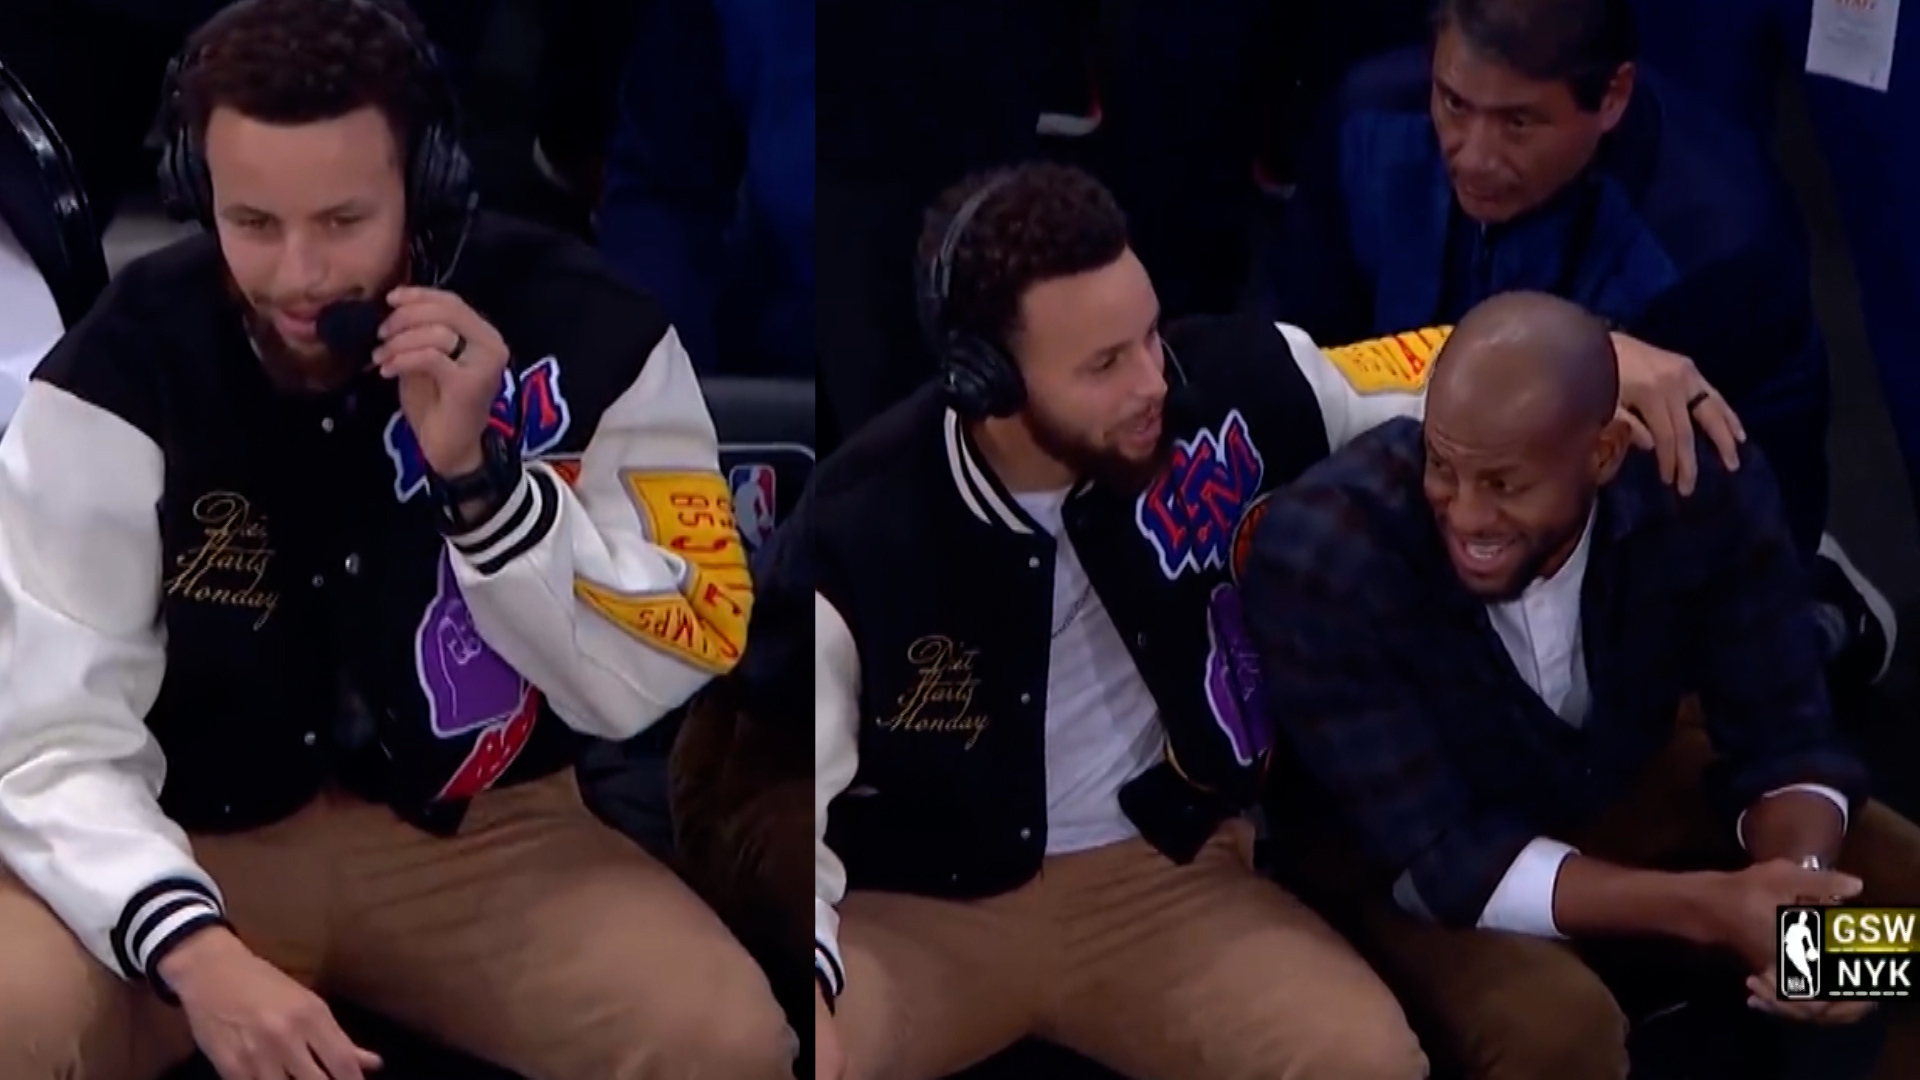 Steph Curry jokes live on TNT broadcast about Andre Iguodala's golf game